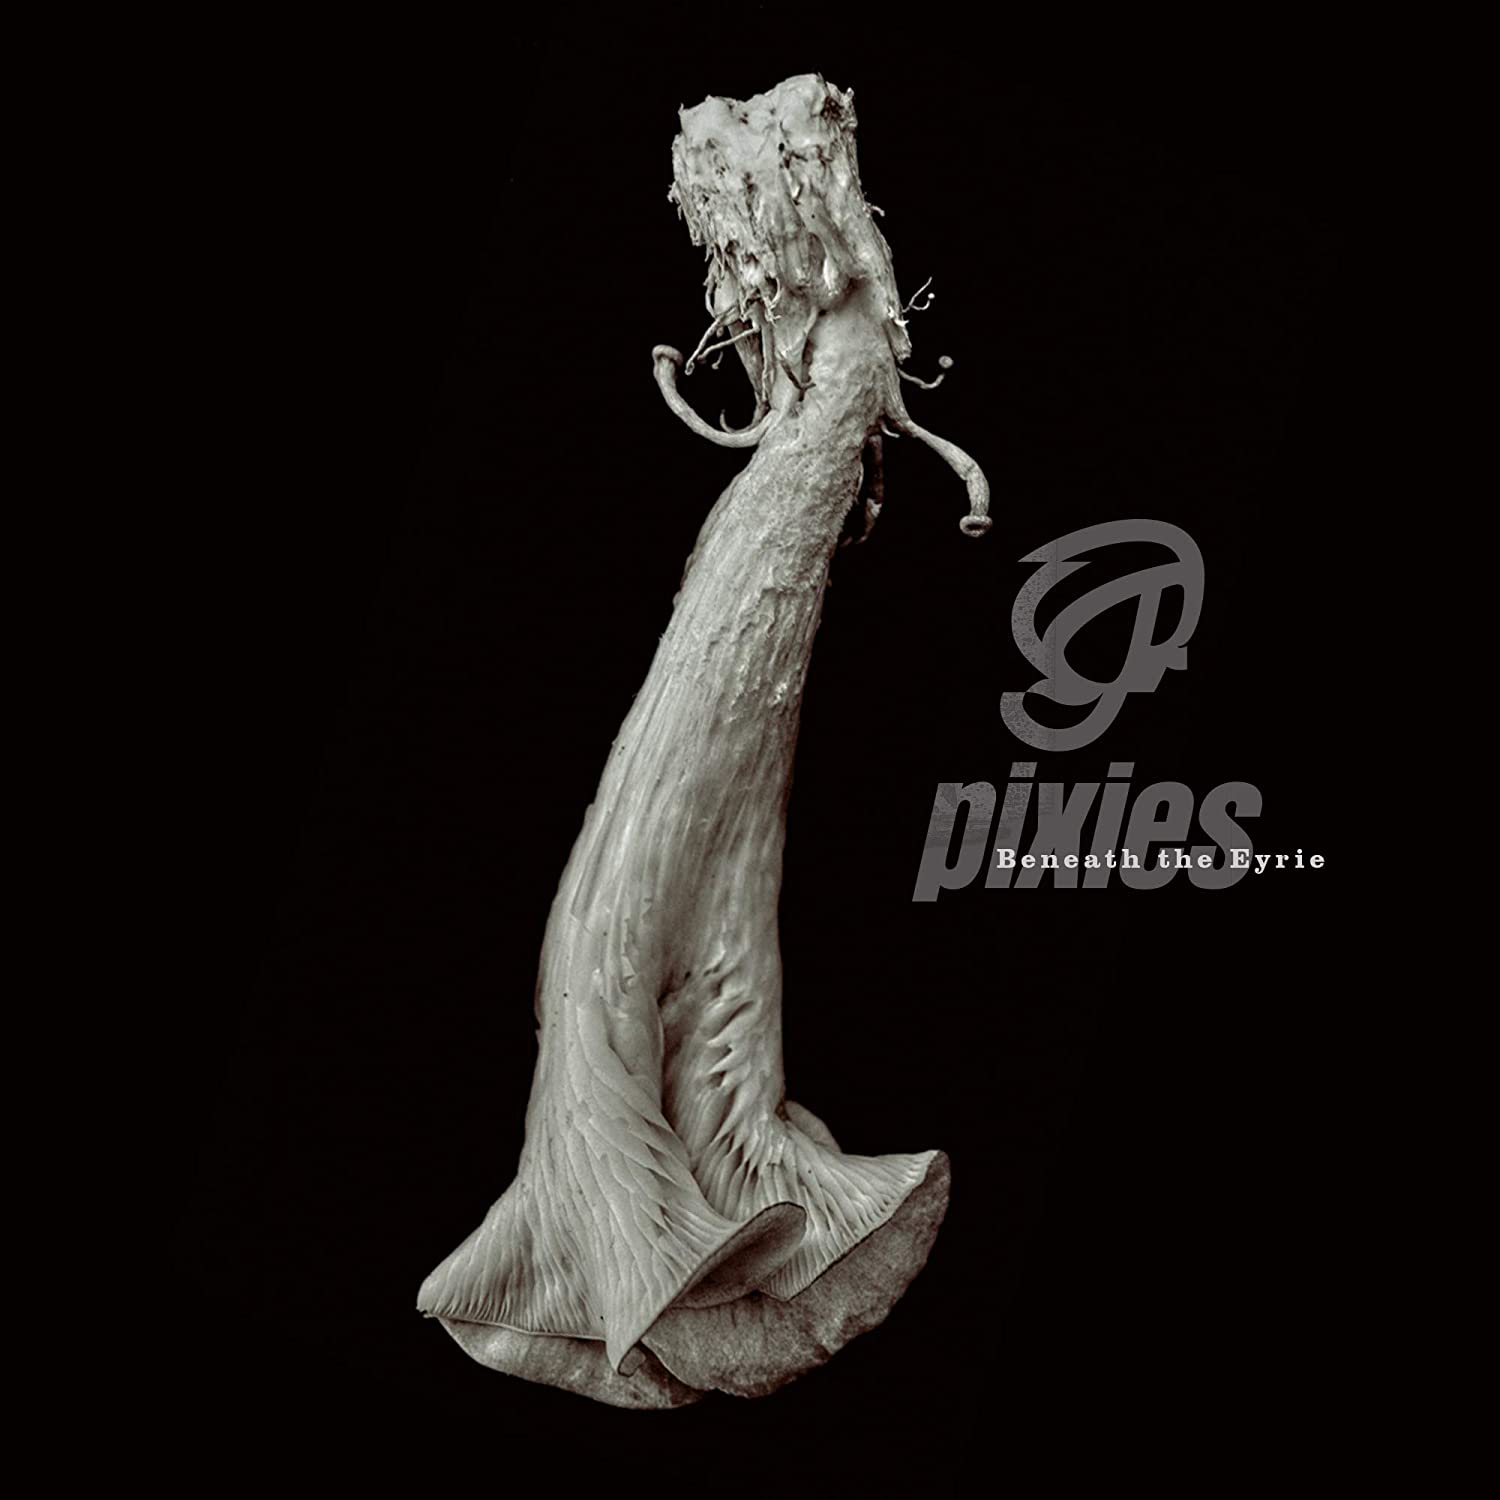 Seventh full-length album on Vinyl from the iconic Pixies. Sessions for the album took place at Dreamland Recordings near Woodstock, New York and unusually the band documented every minute of the process, which makes up a 12-part podcast.